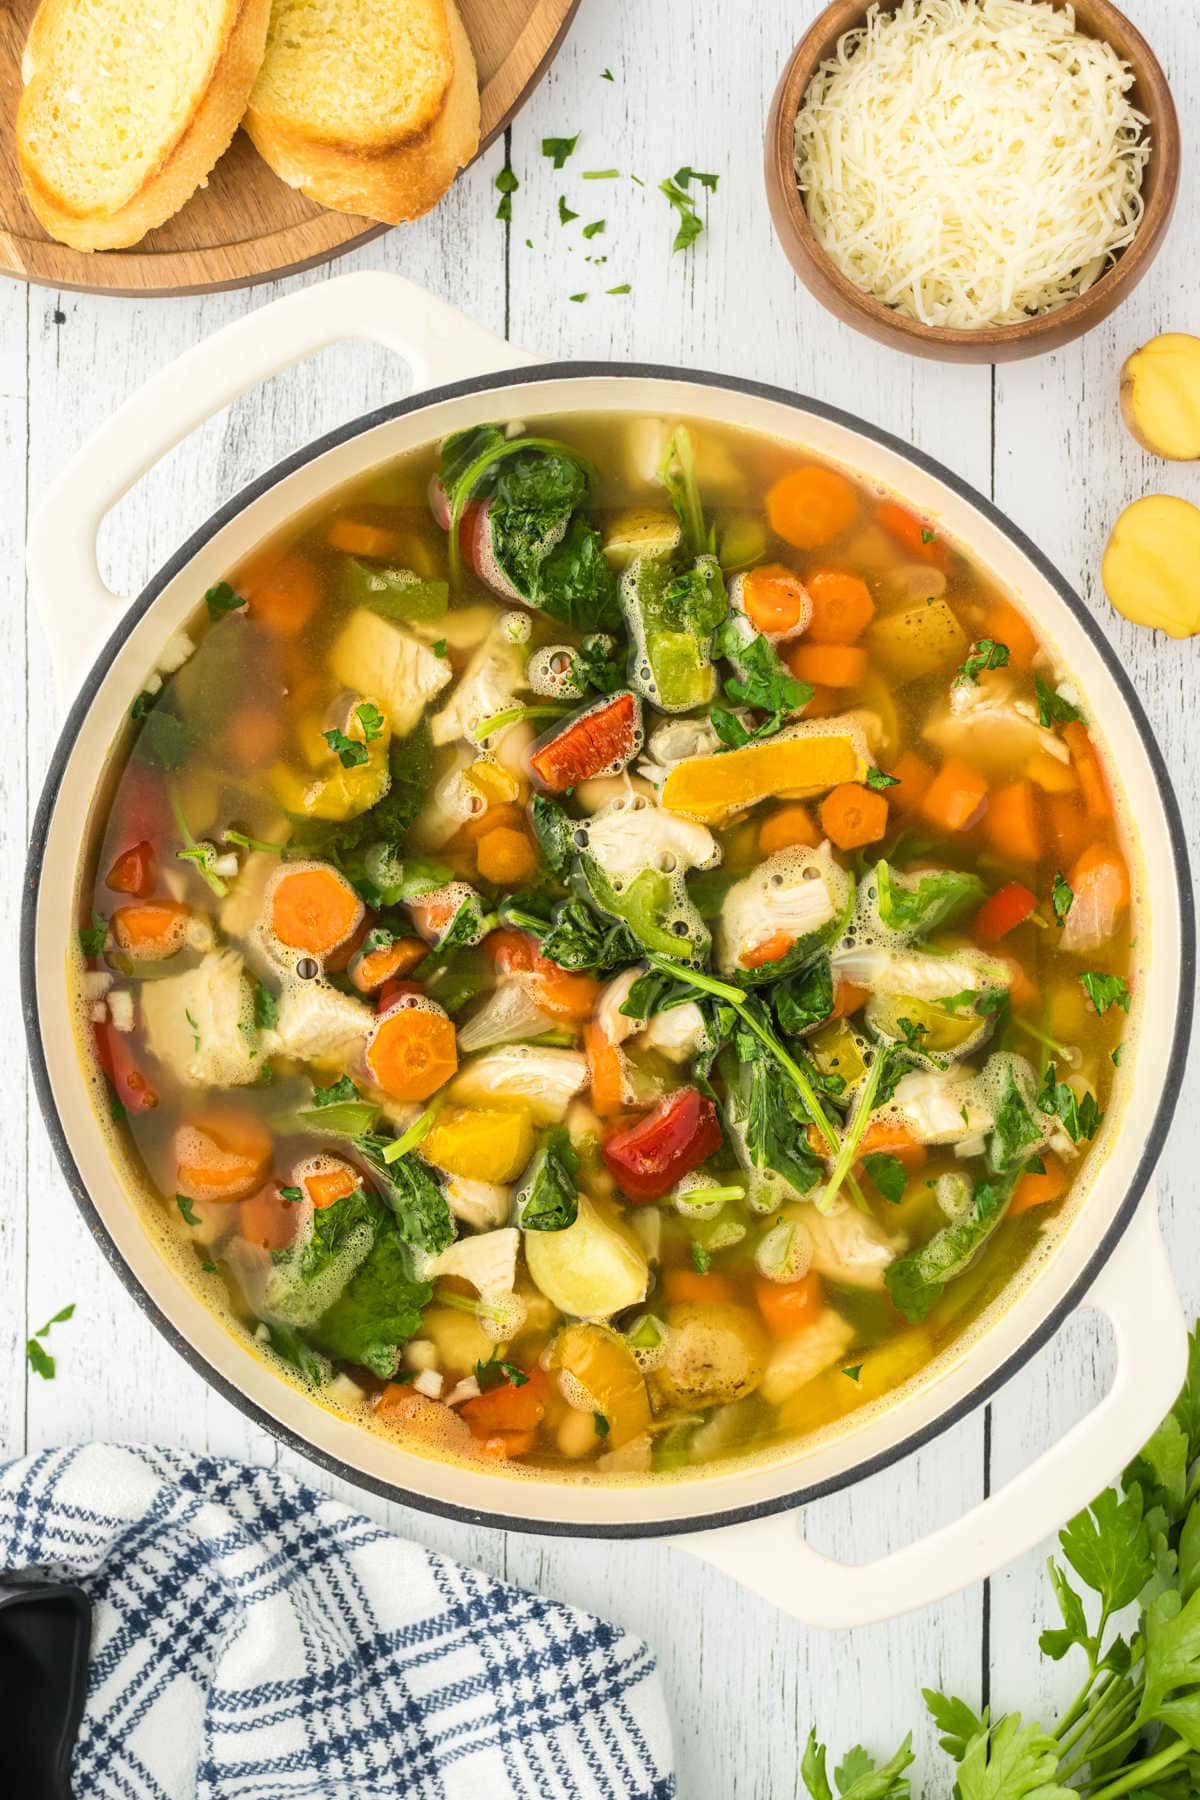 An overhead image of Tuscan turkey soup, showing pieces of kale, potatoes, carrots, peppers, beans, and broth in a white Dutch oven. Bread and parmesan cheese are off to the side of the image.